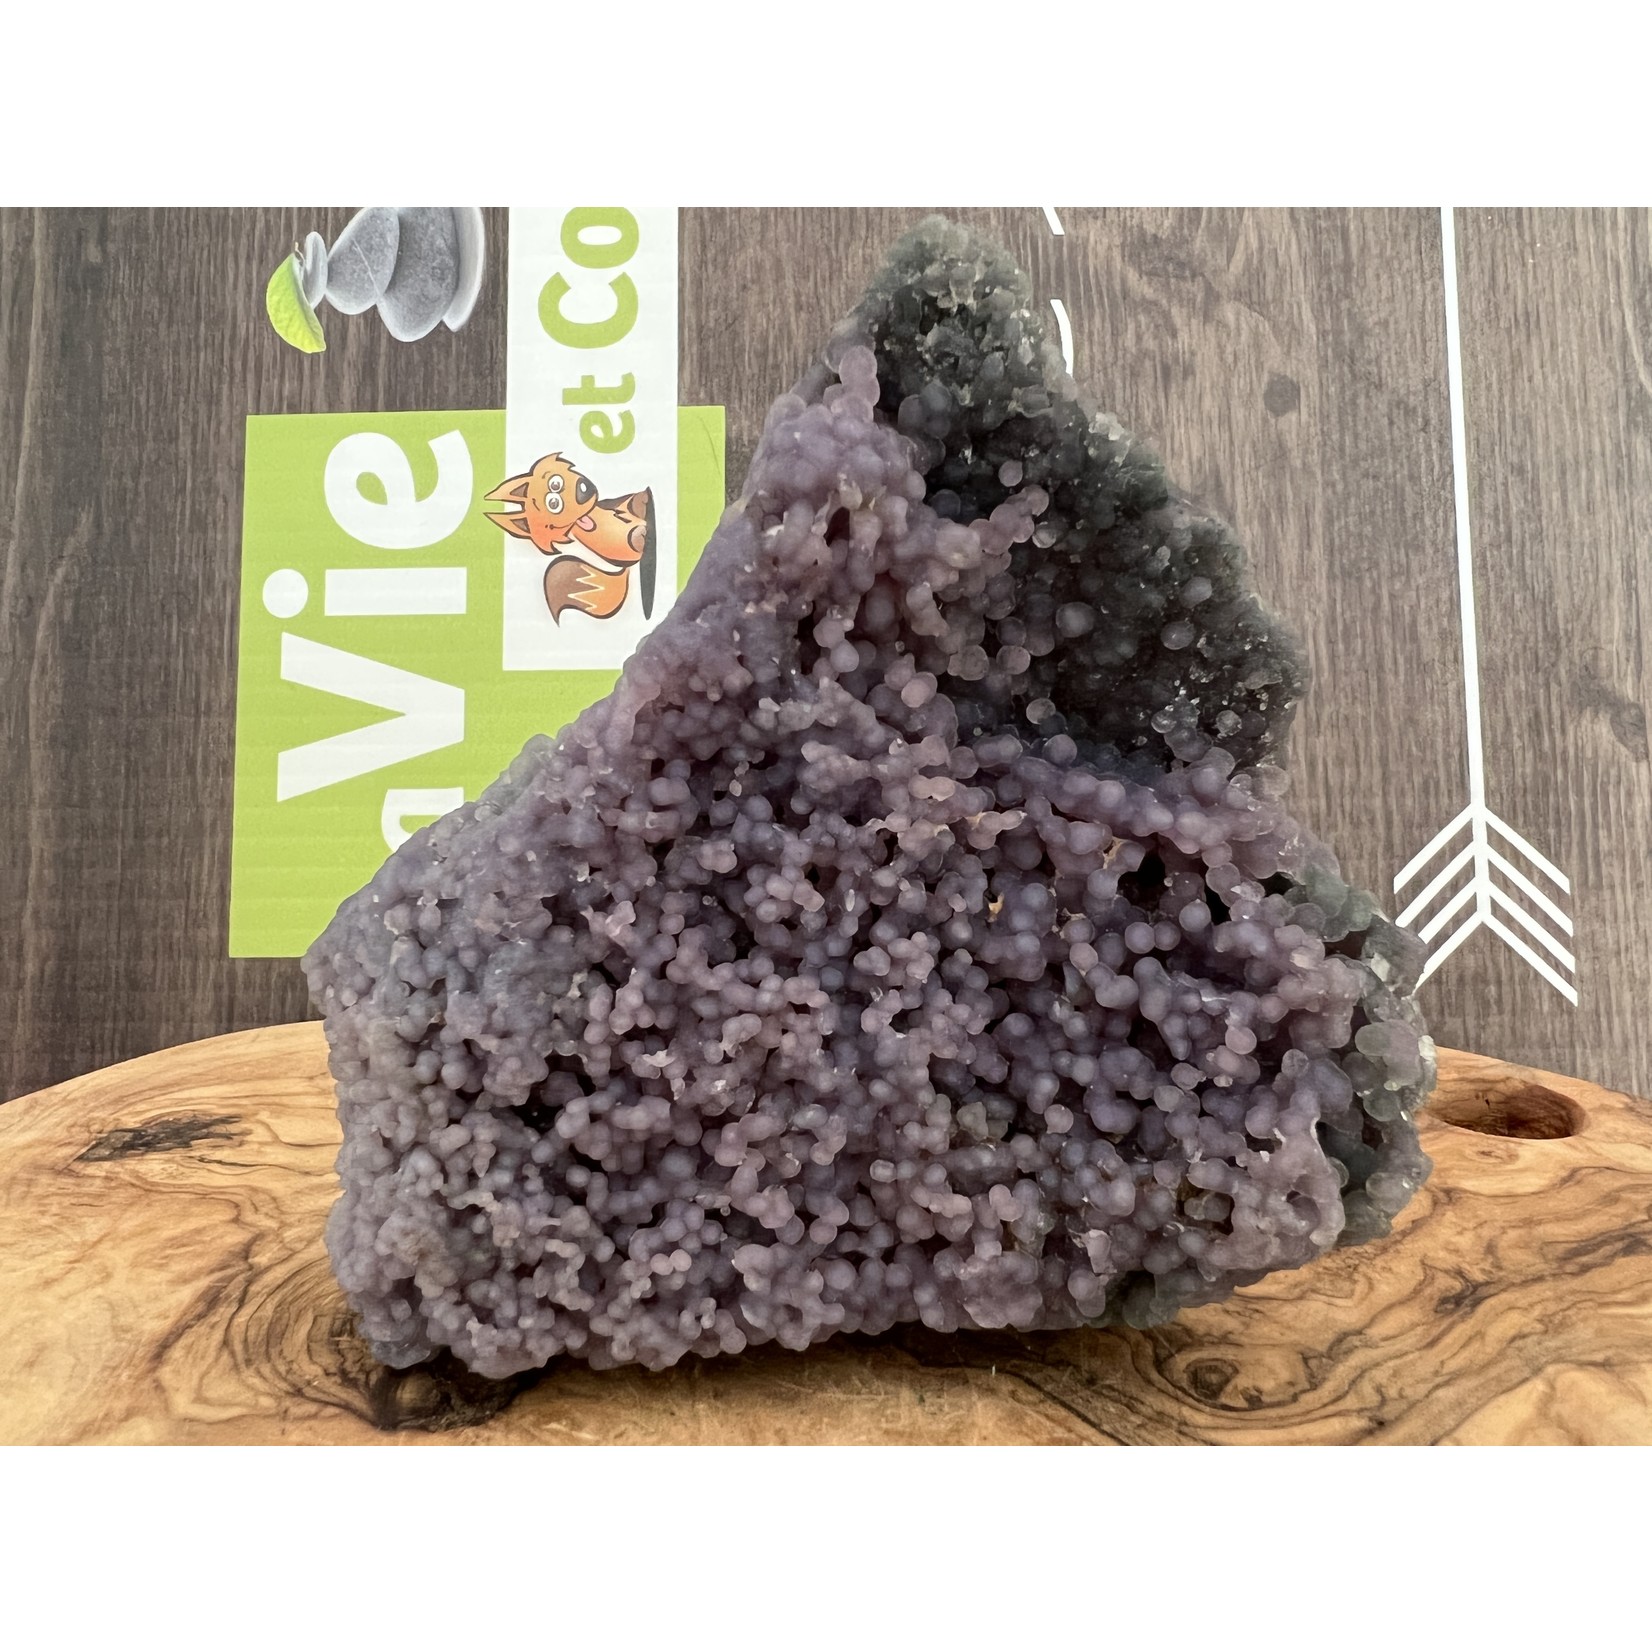 majestic grape agate cluster XL, also known as purple botryoid chalcedony, purple Manakarra chalcedony, leads us towards serenity